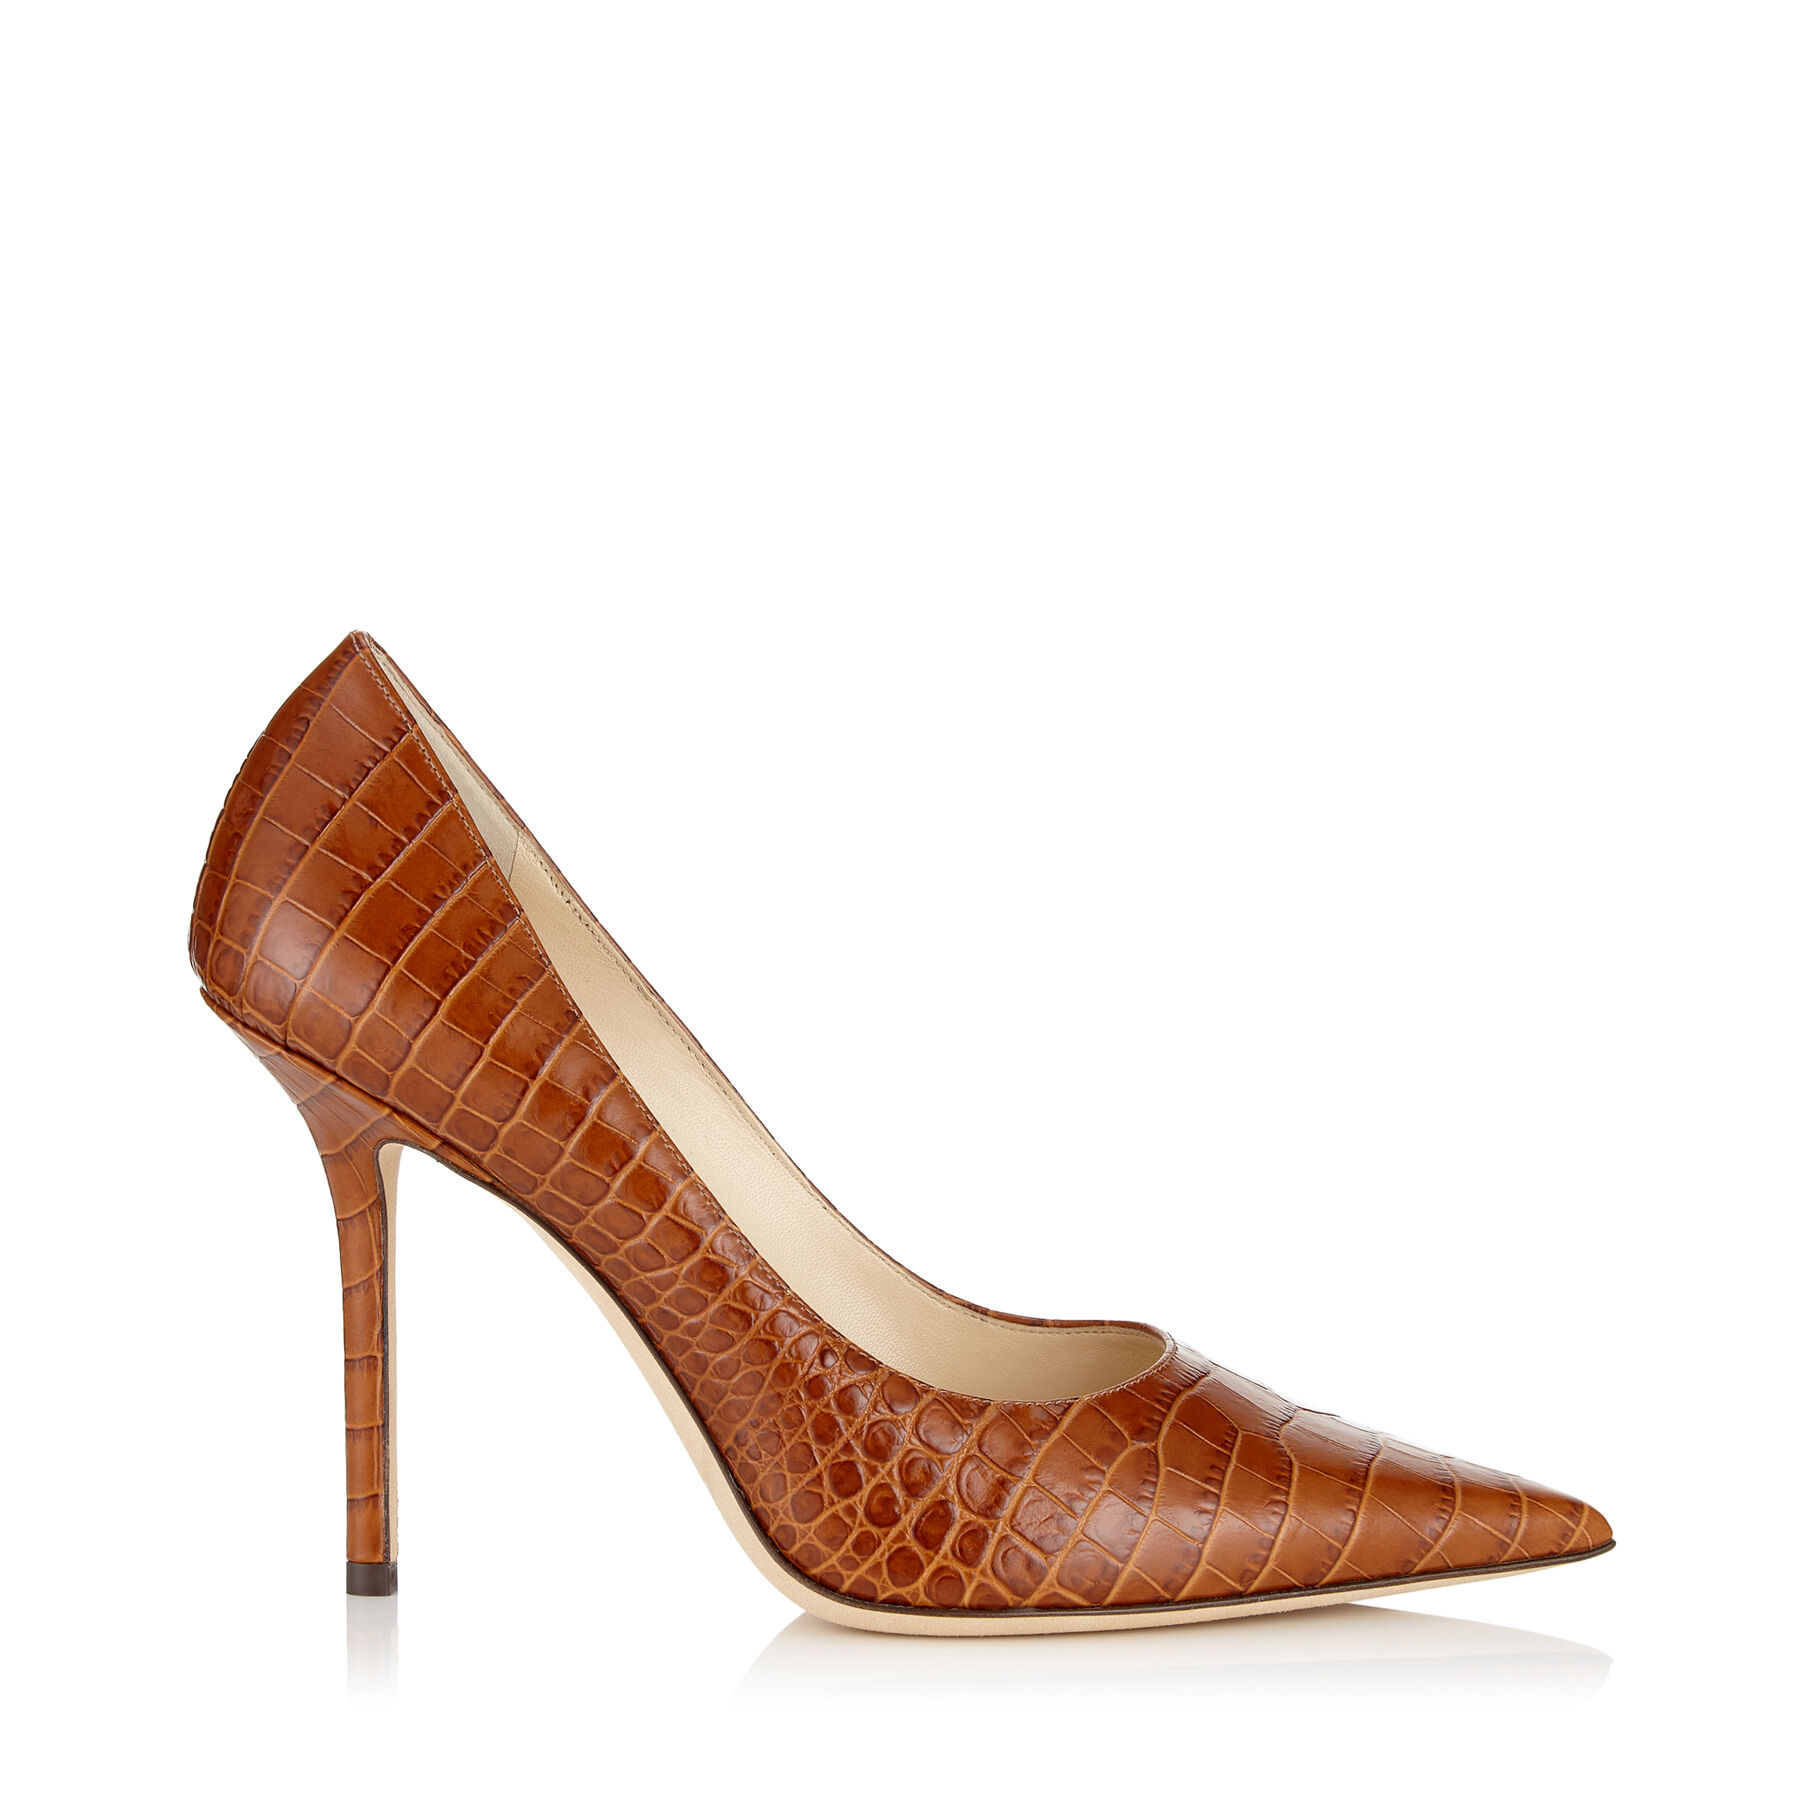 Cuoio Croc Embossed Leather Pointy Toe Pump| LOVE 100| Pre Fall 19 ...